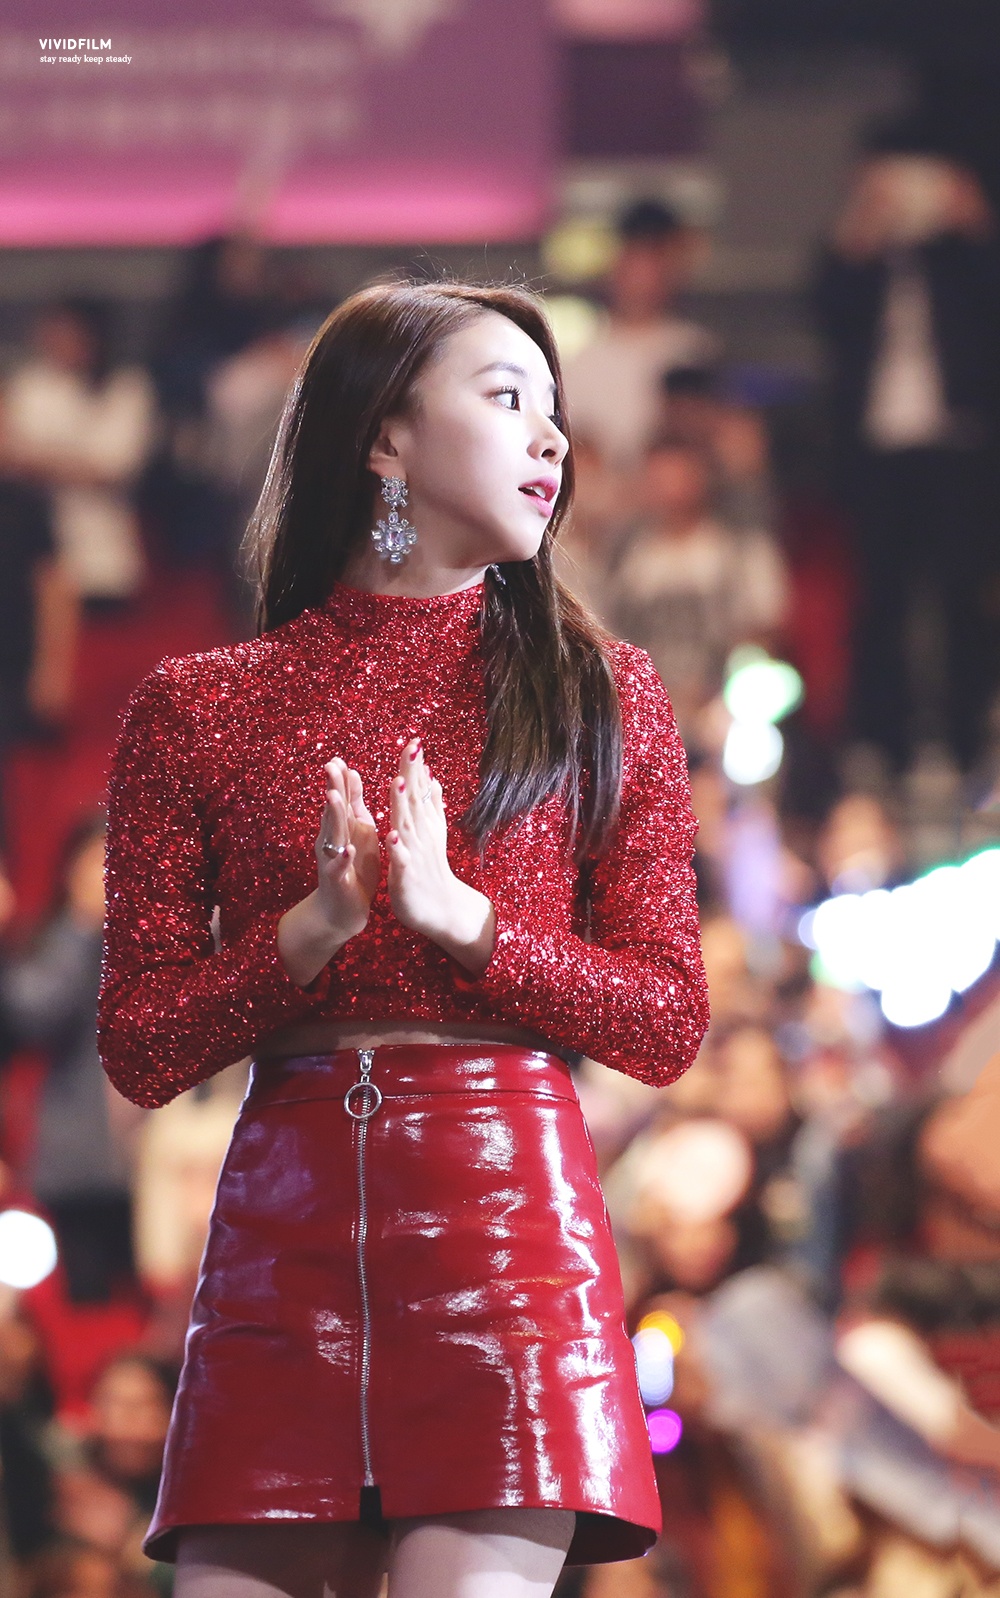 Chaeyoung looks like an absolute goddess in red.